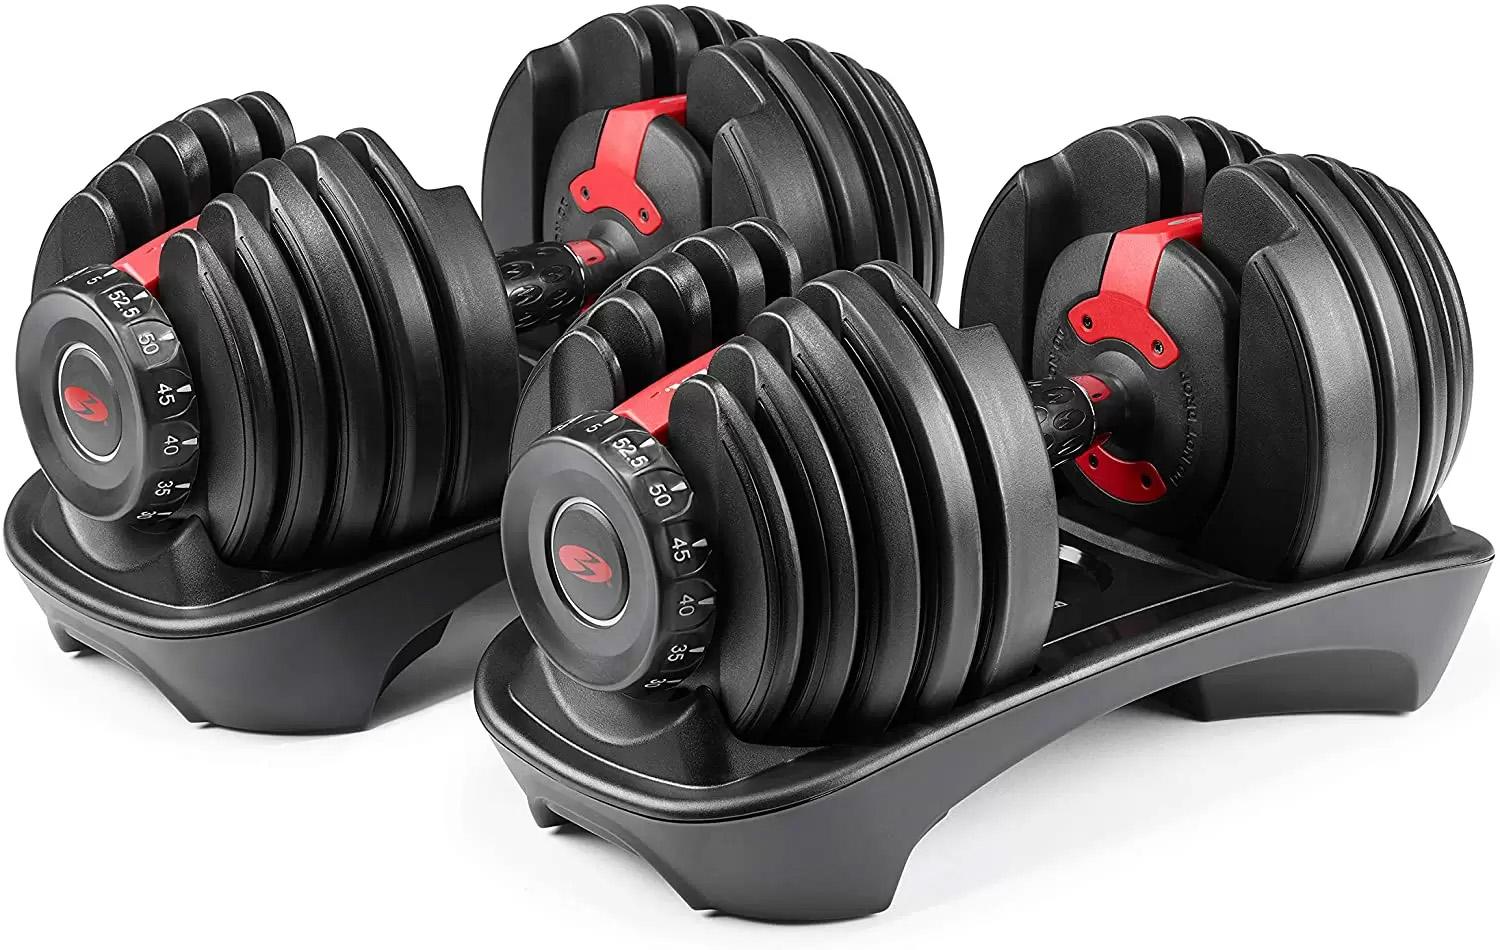 Bowflex SelectTech 552 Two Adjustable Dumbbells for $349 Shipped